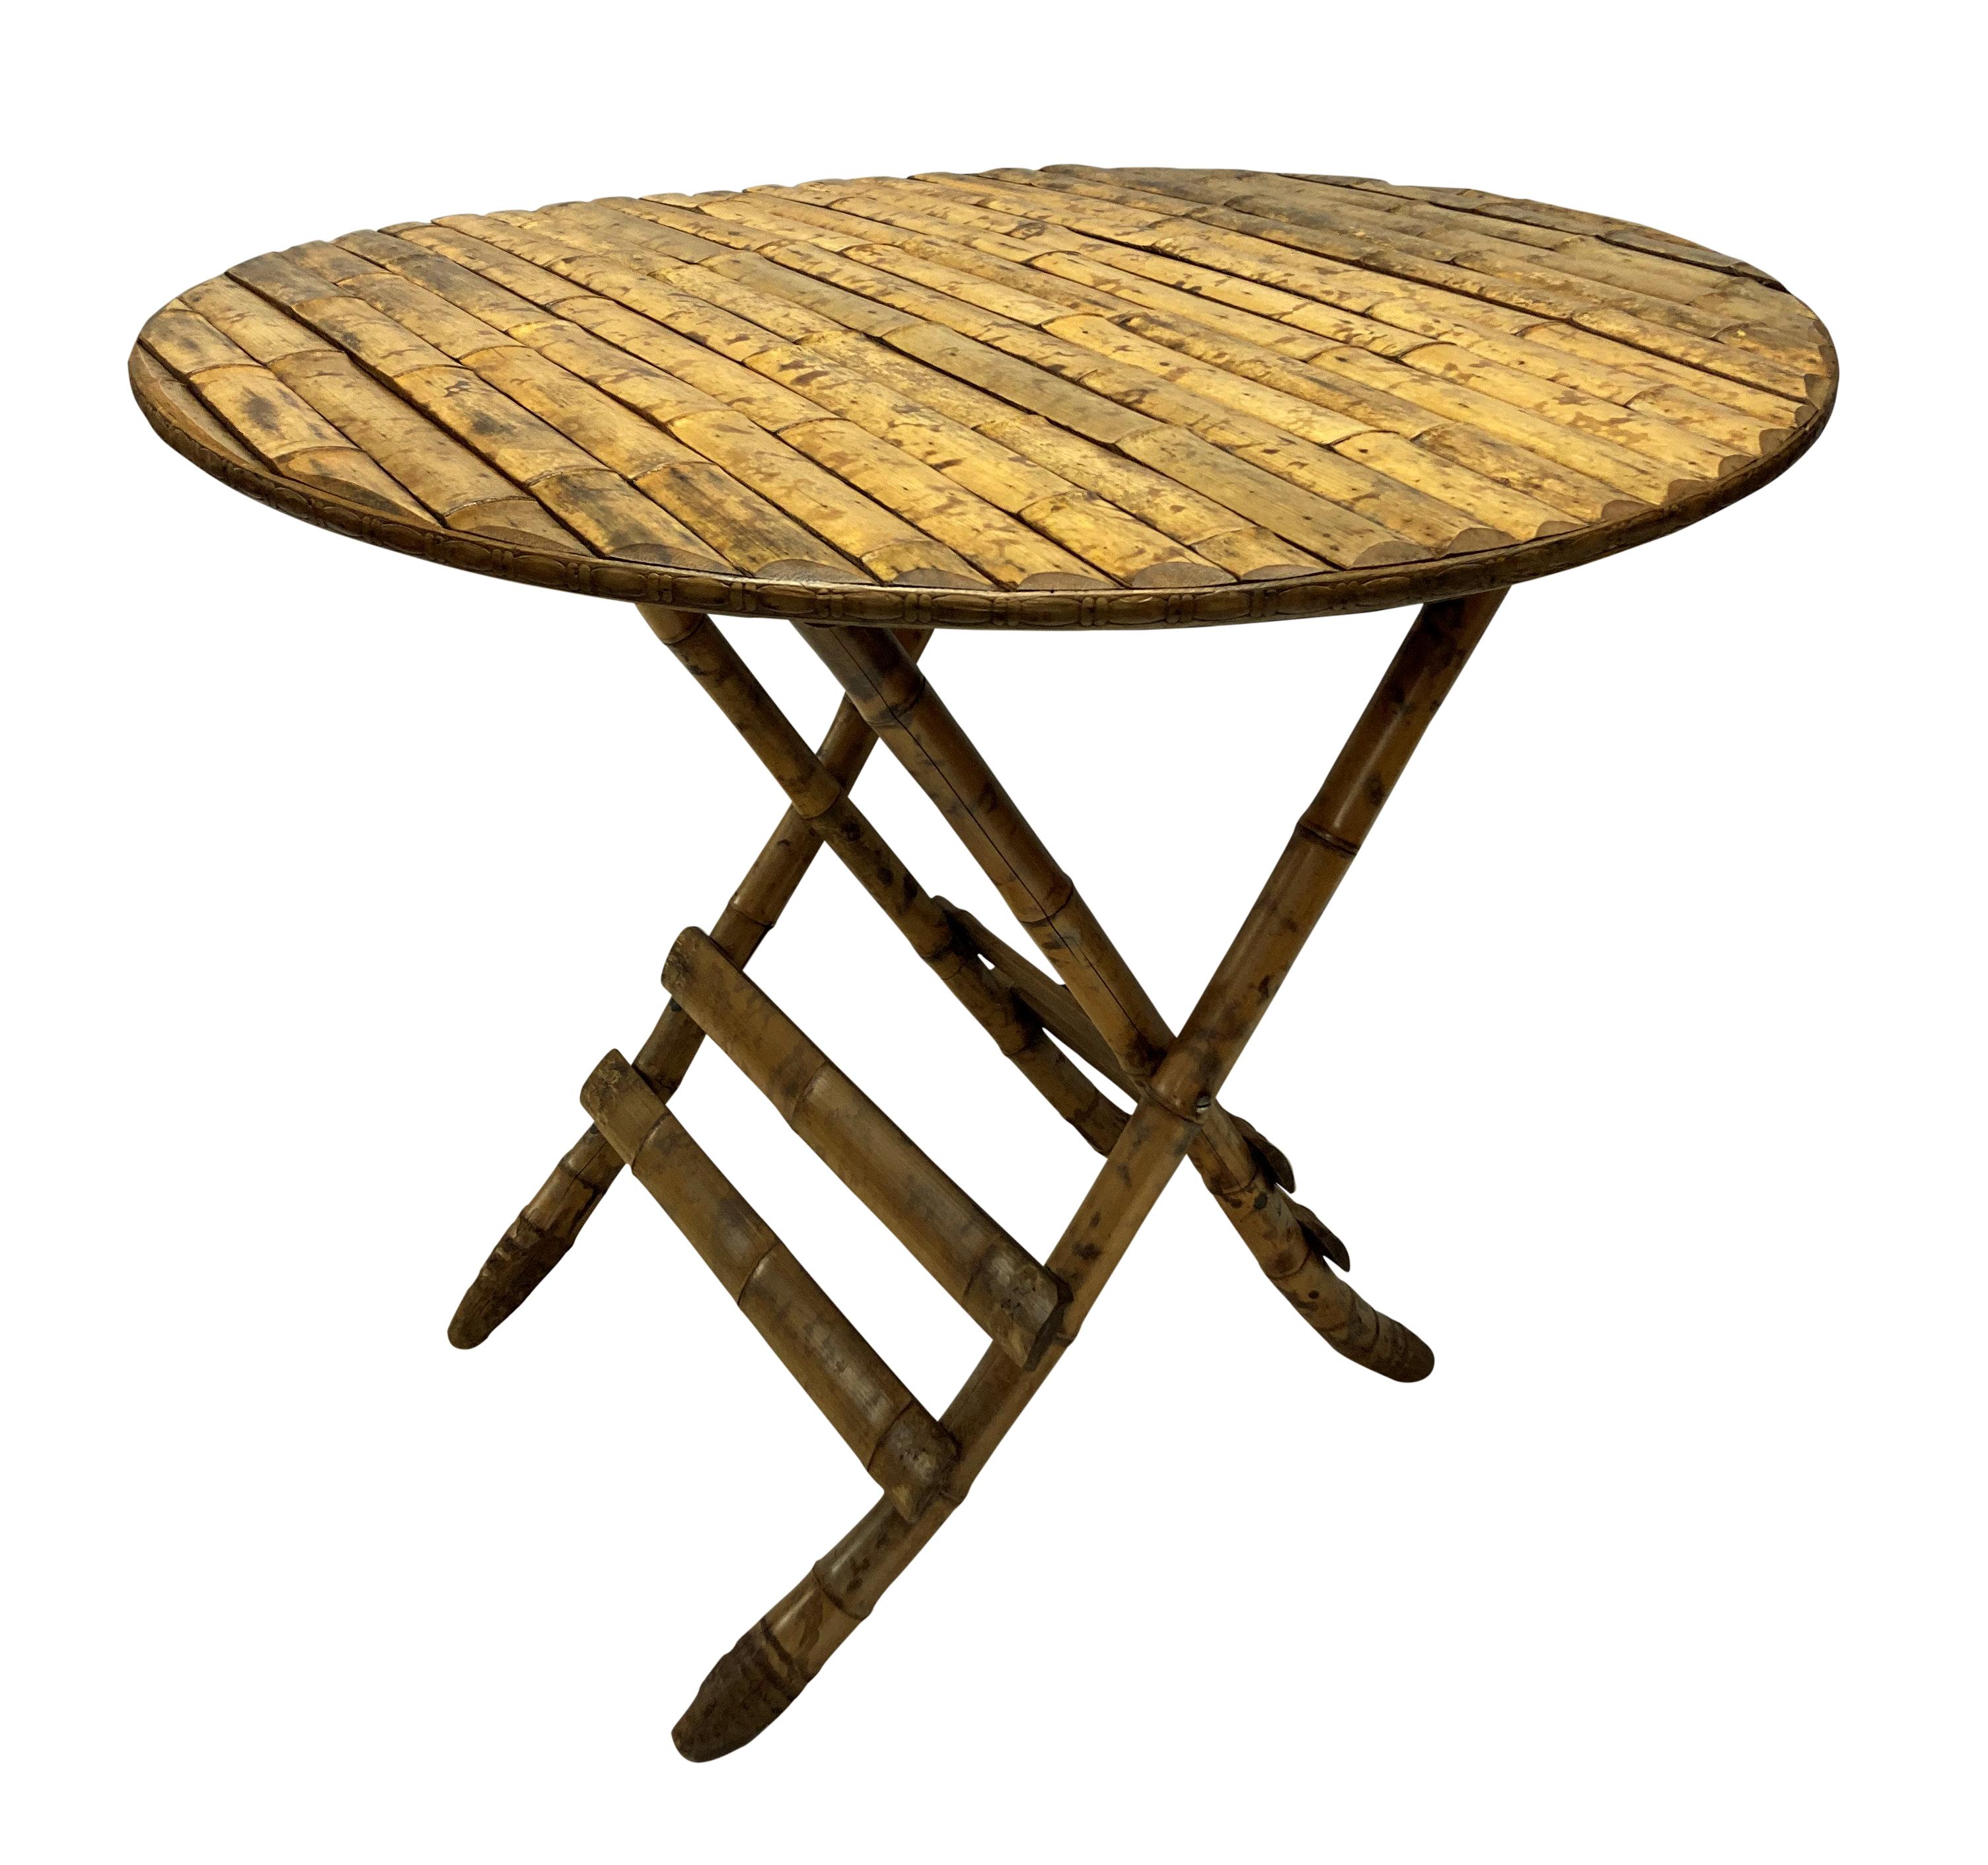 A stylish French folding table with bamboo legs and a slatted bamboo veneered top and decorative edge.